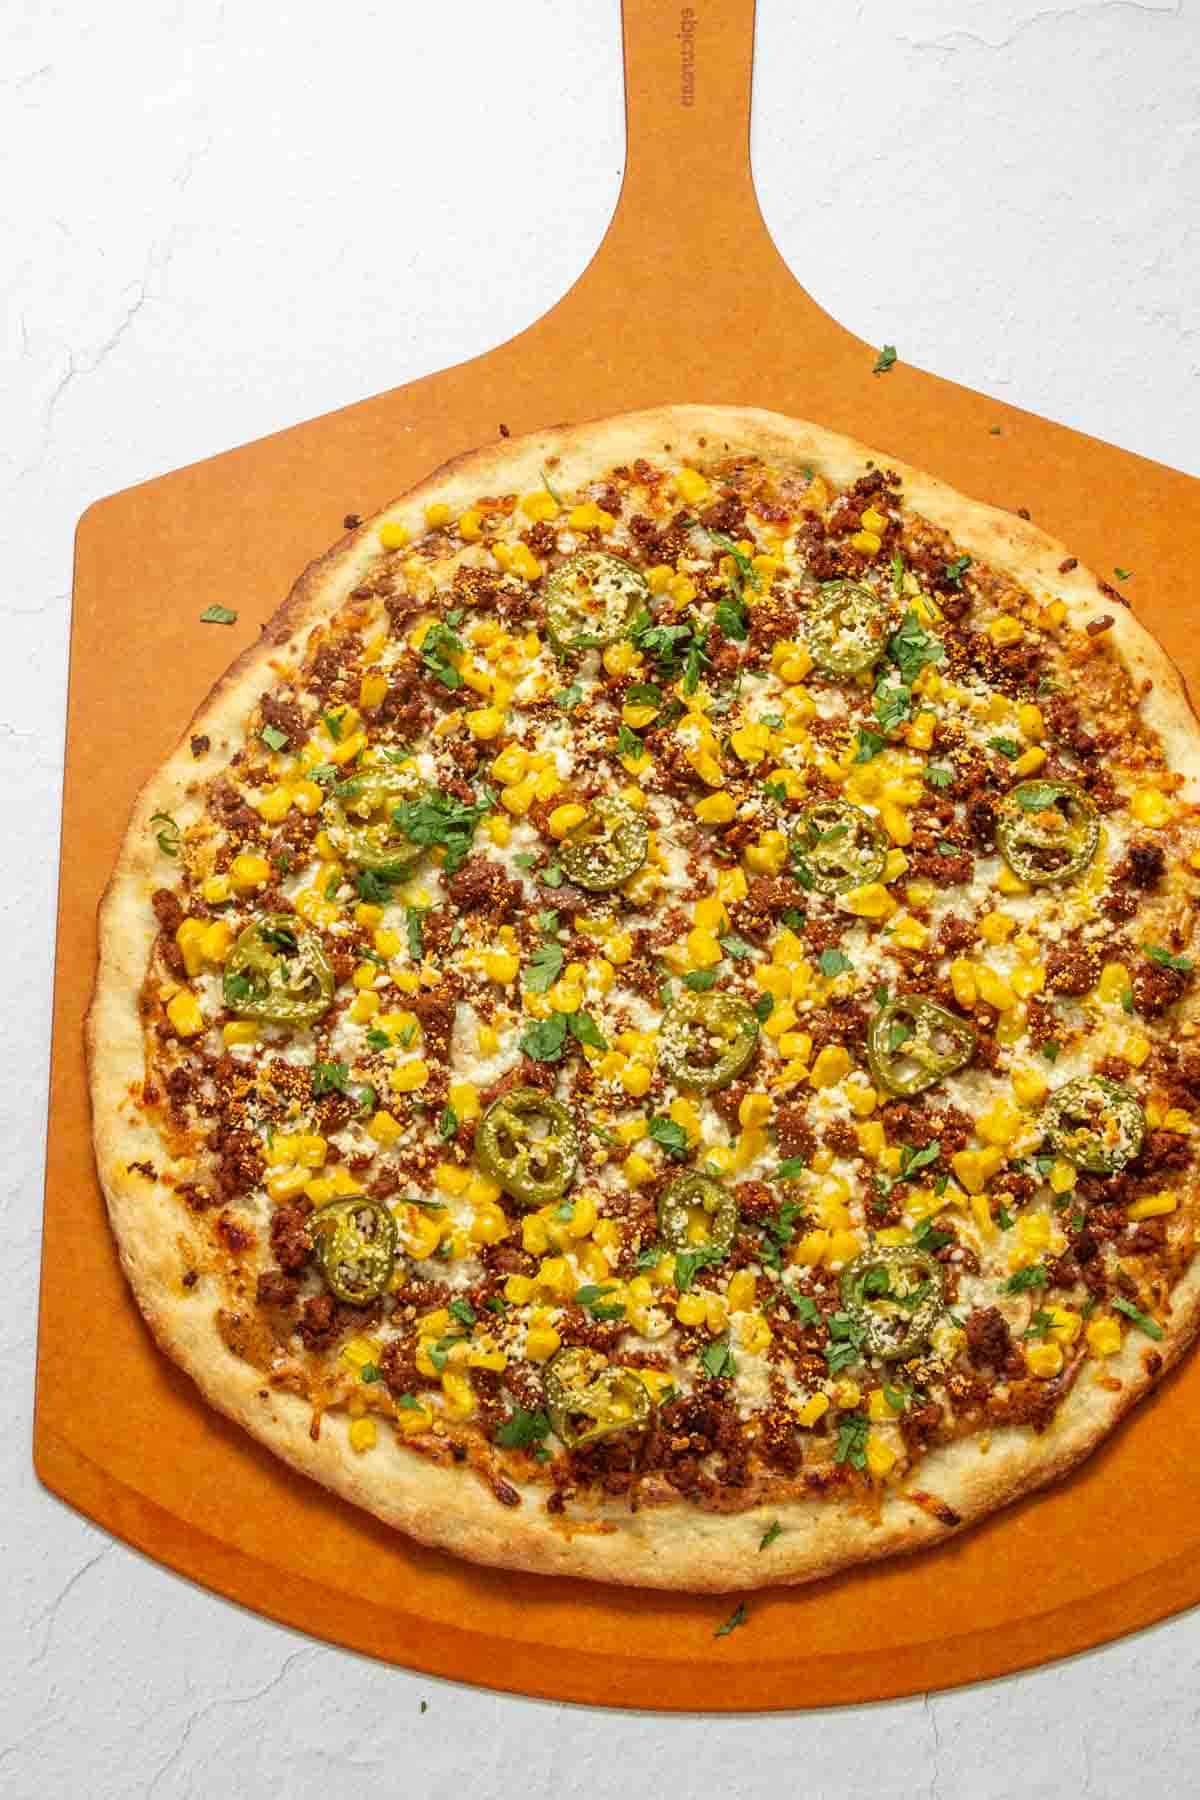 A pizza topped with corn, jalapeños, ground meat, cheese, and herbs is placed on an orange pizza peel.